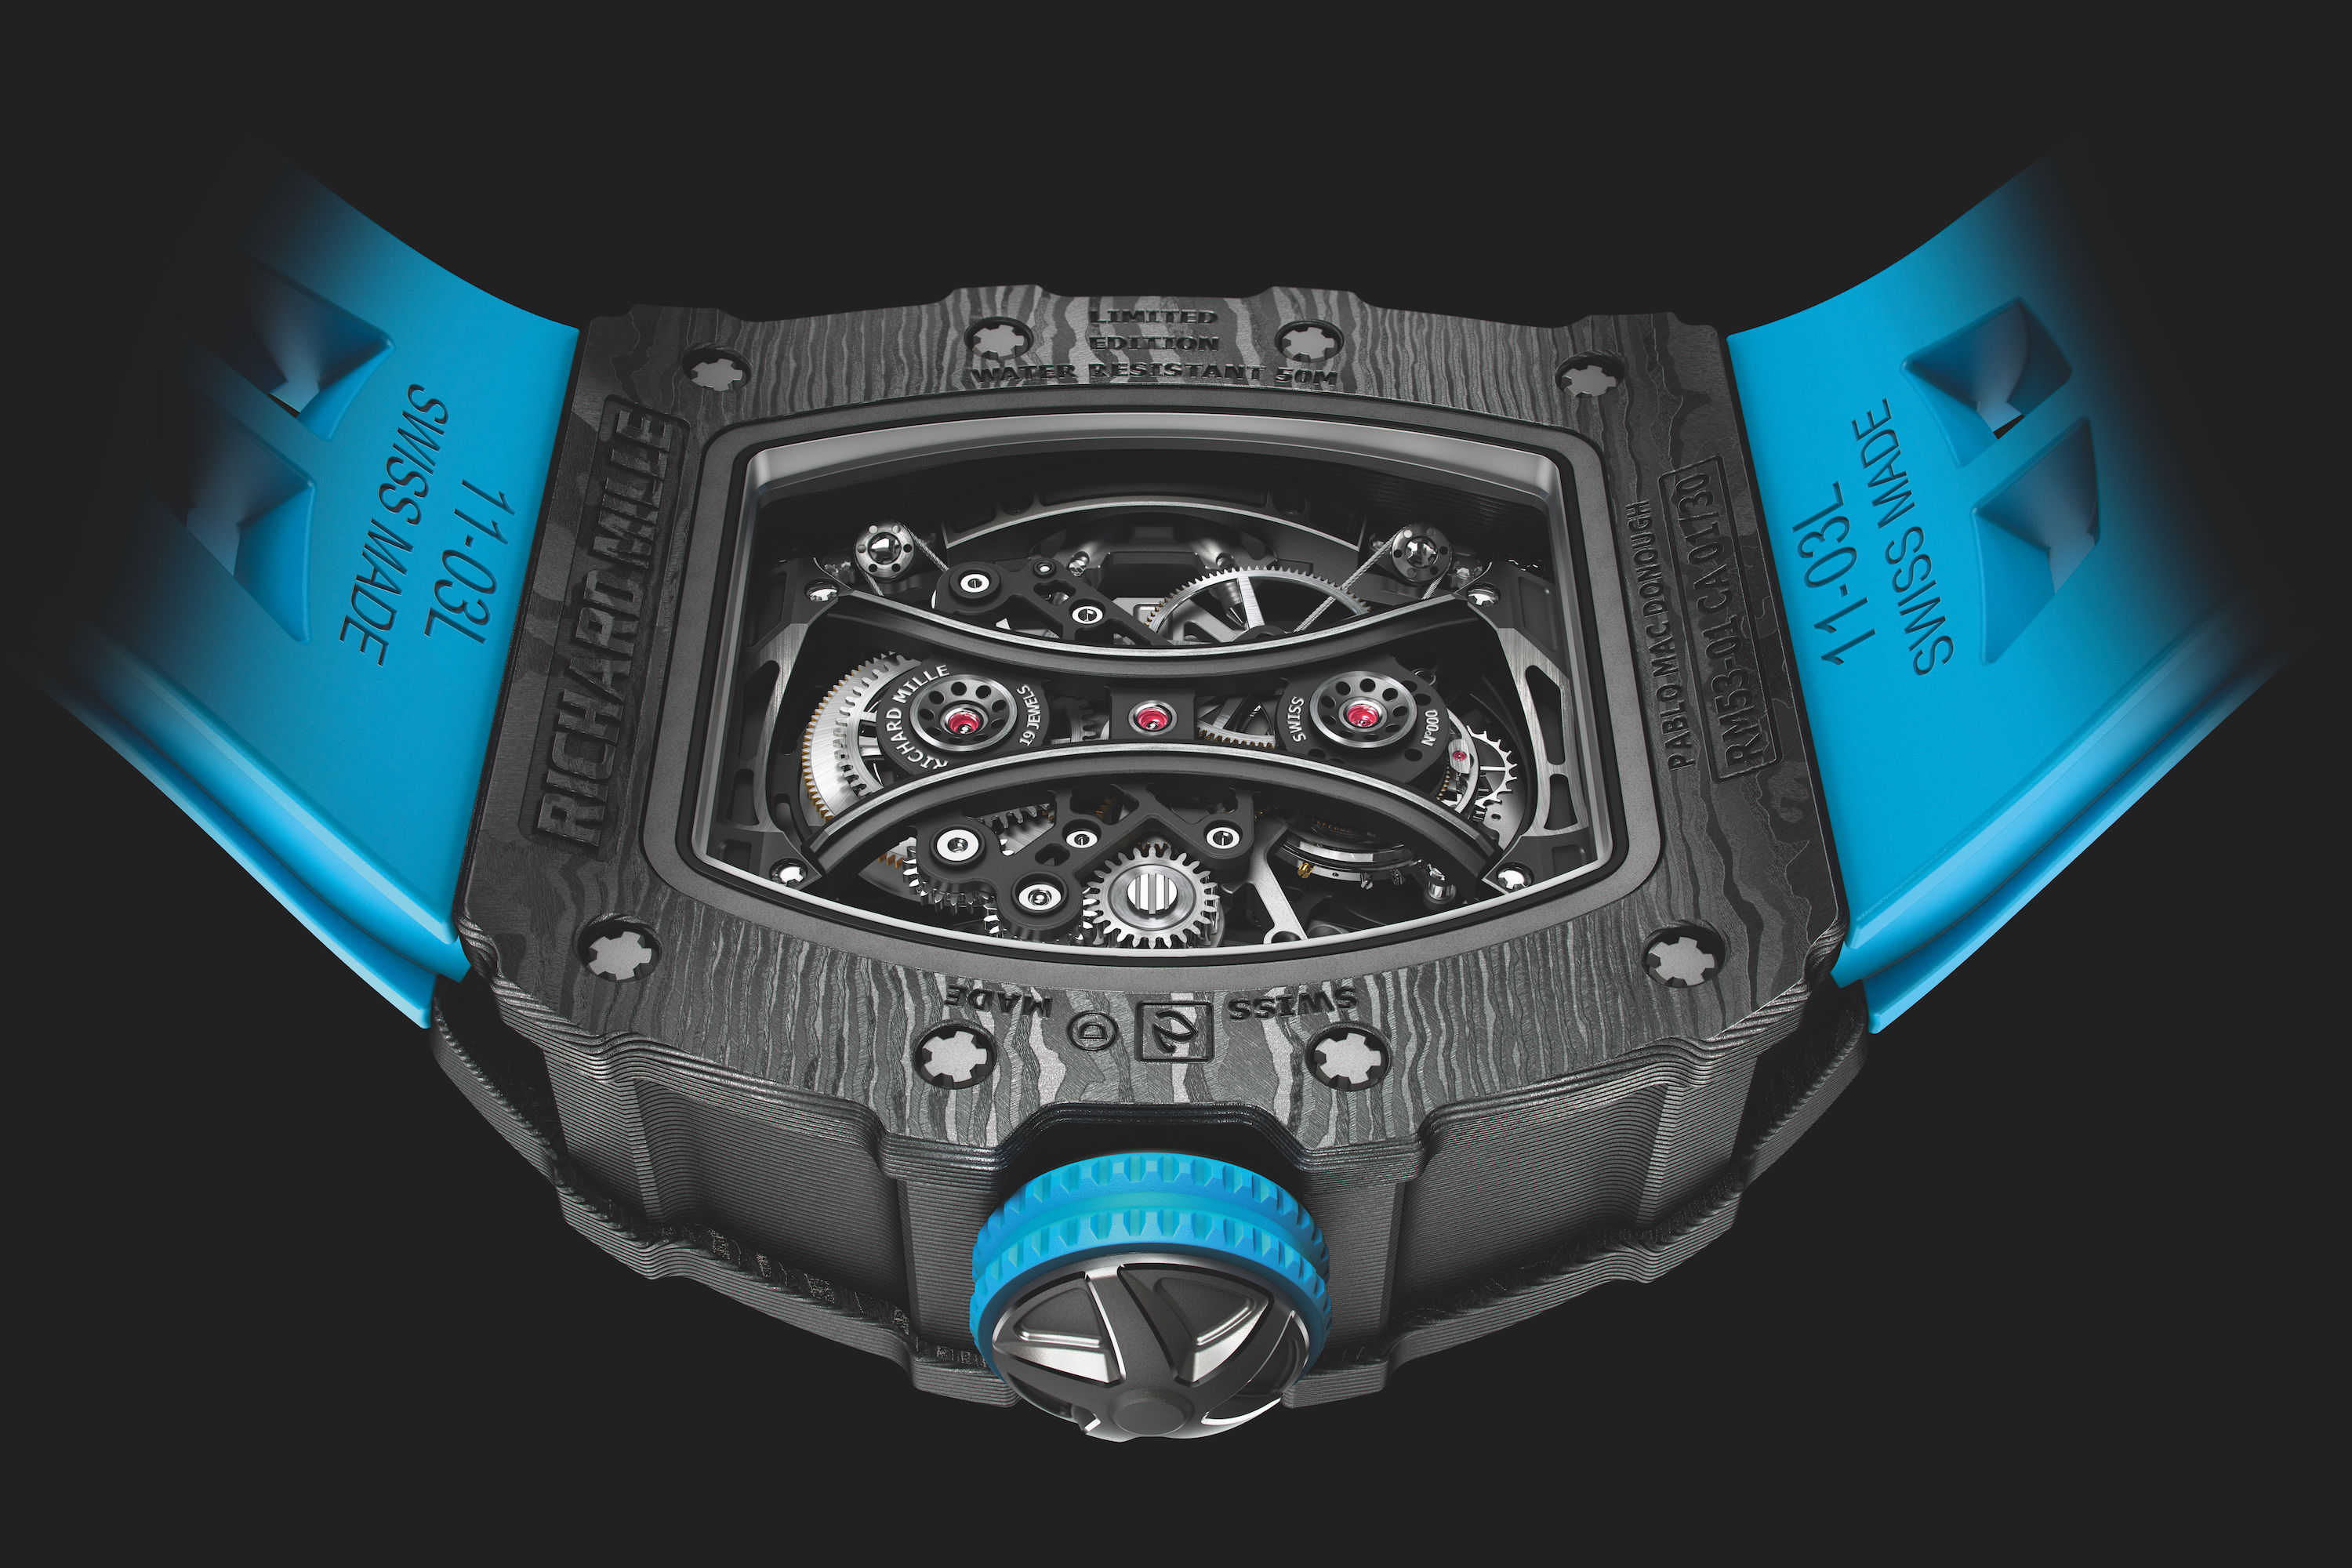 Richard Mille returns to the ancient sport of polo for its most modern timepiece yet